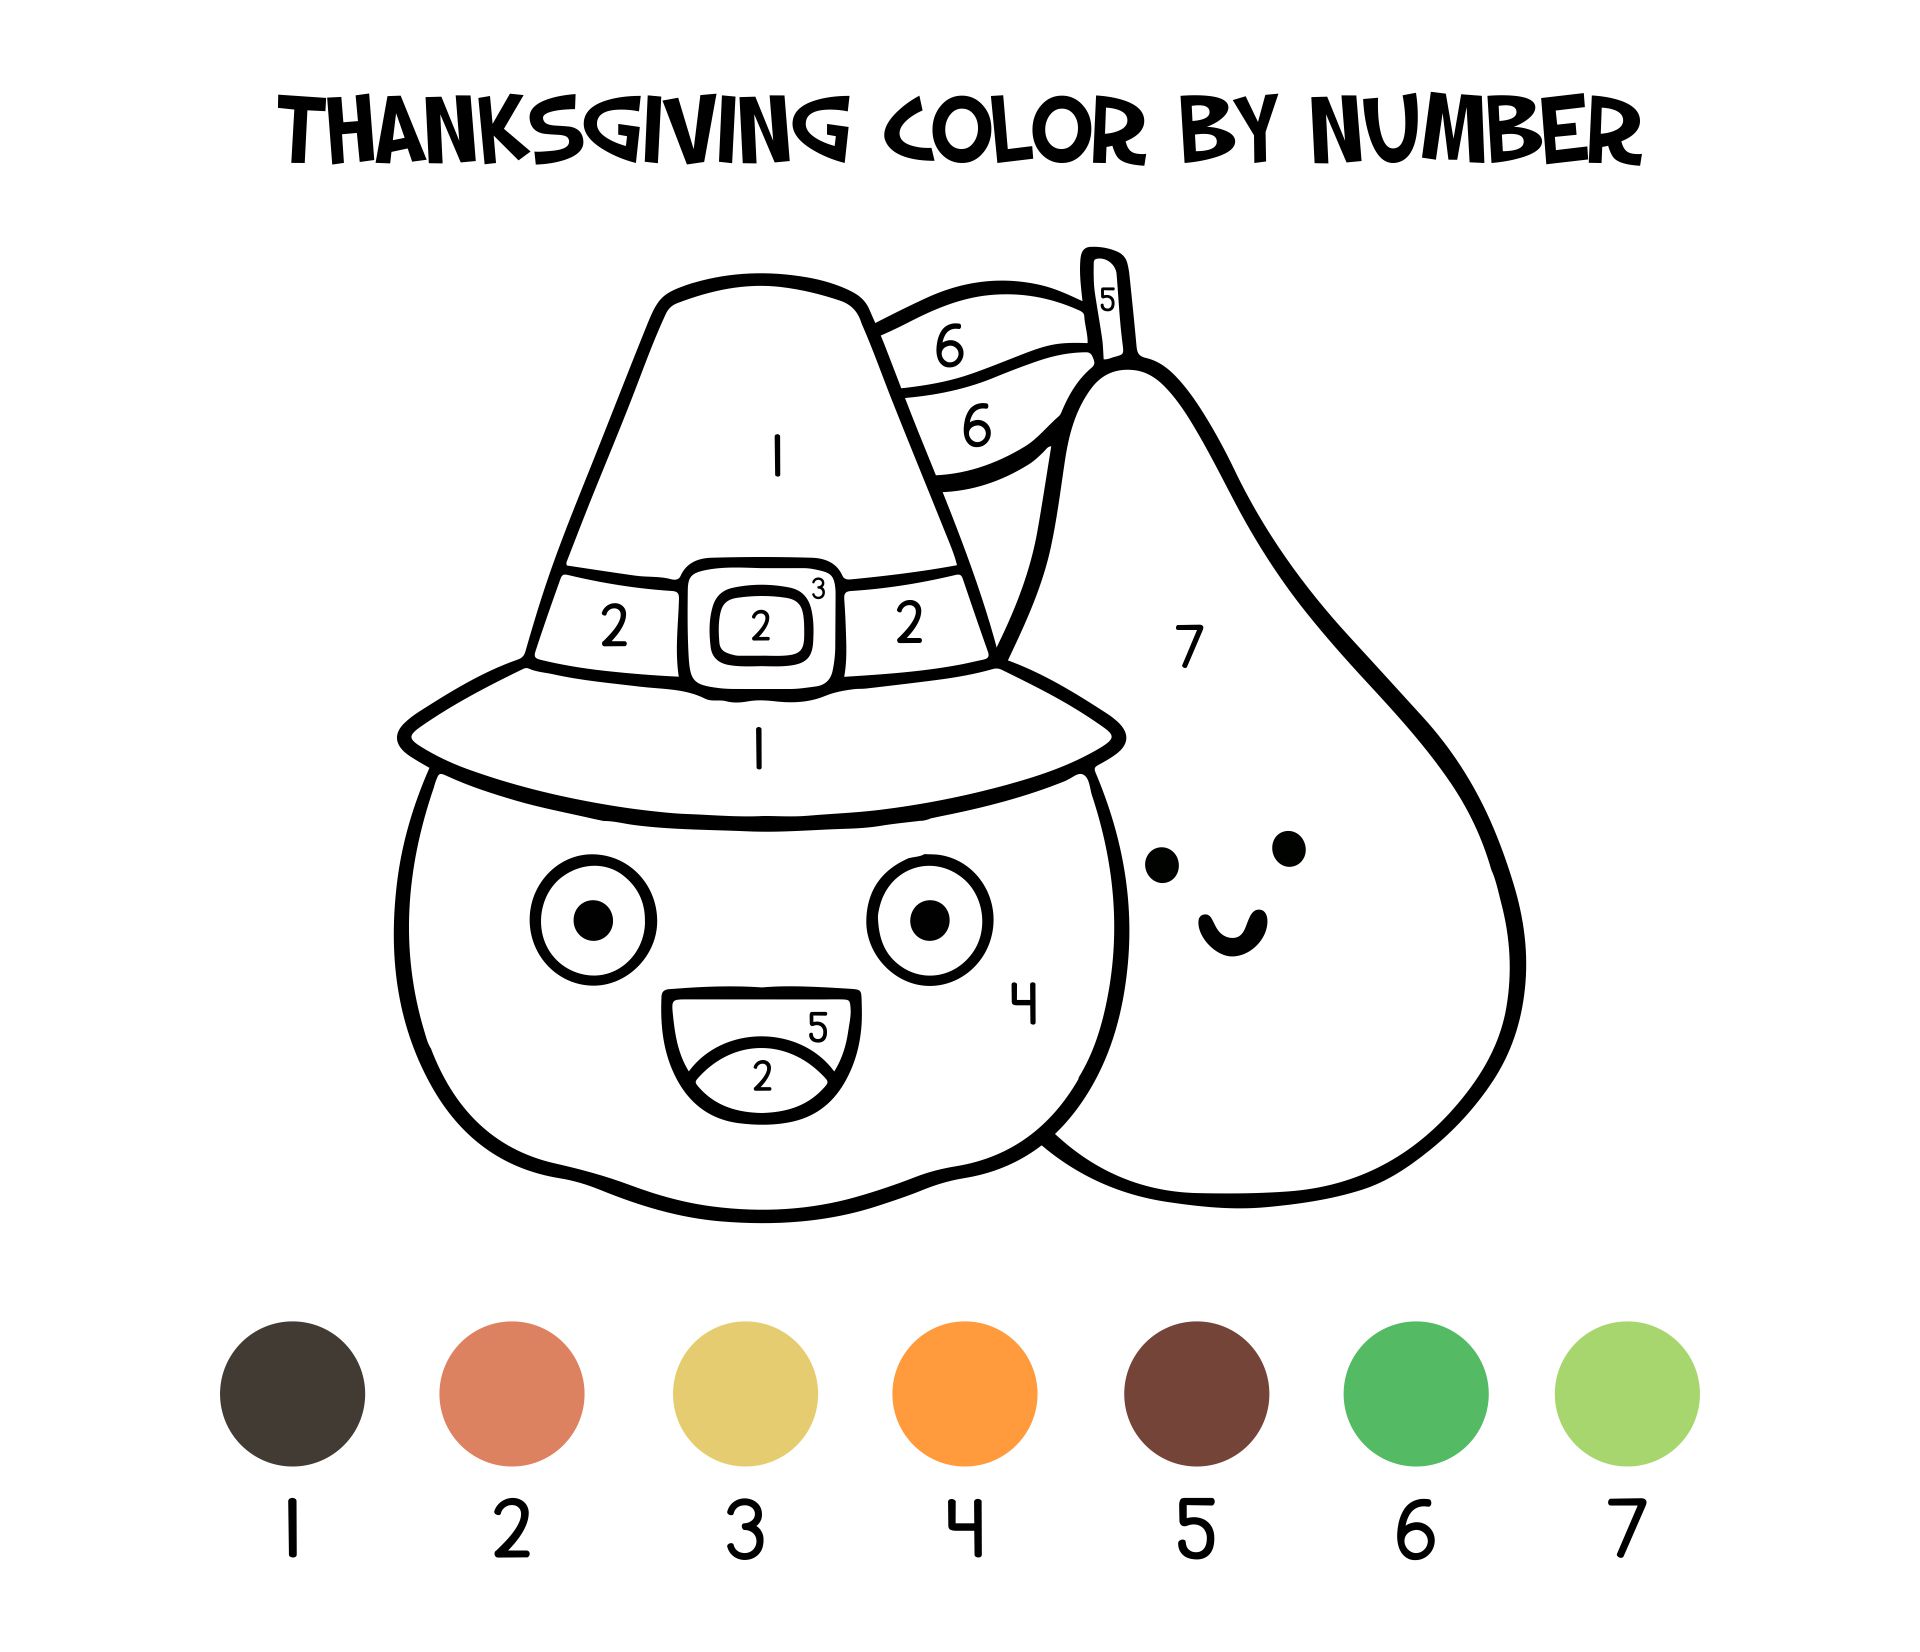 Happy Thanksgiving Color By Number Coloring Page Printable For Kids